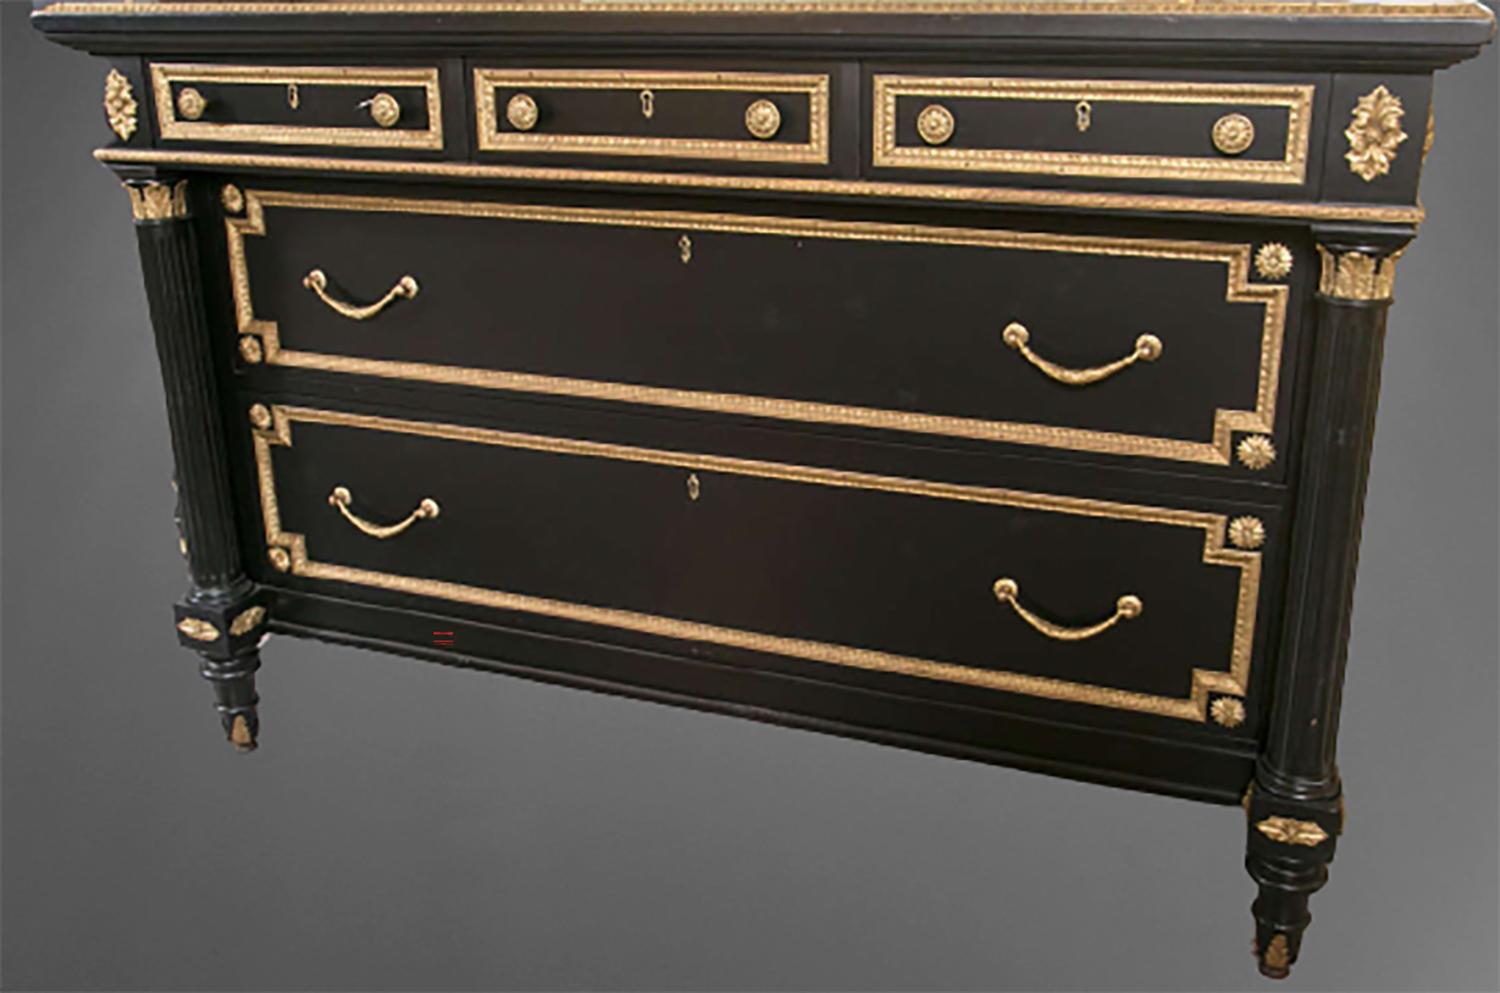 This ebonized bronze-mounted chest portrays the Chateau de Versailles in its finest. The gilt gold adds dimension and beauty to its linear and rectangular elements, the combination of curves and bows complete this magnificently fine piece. Three